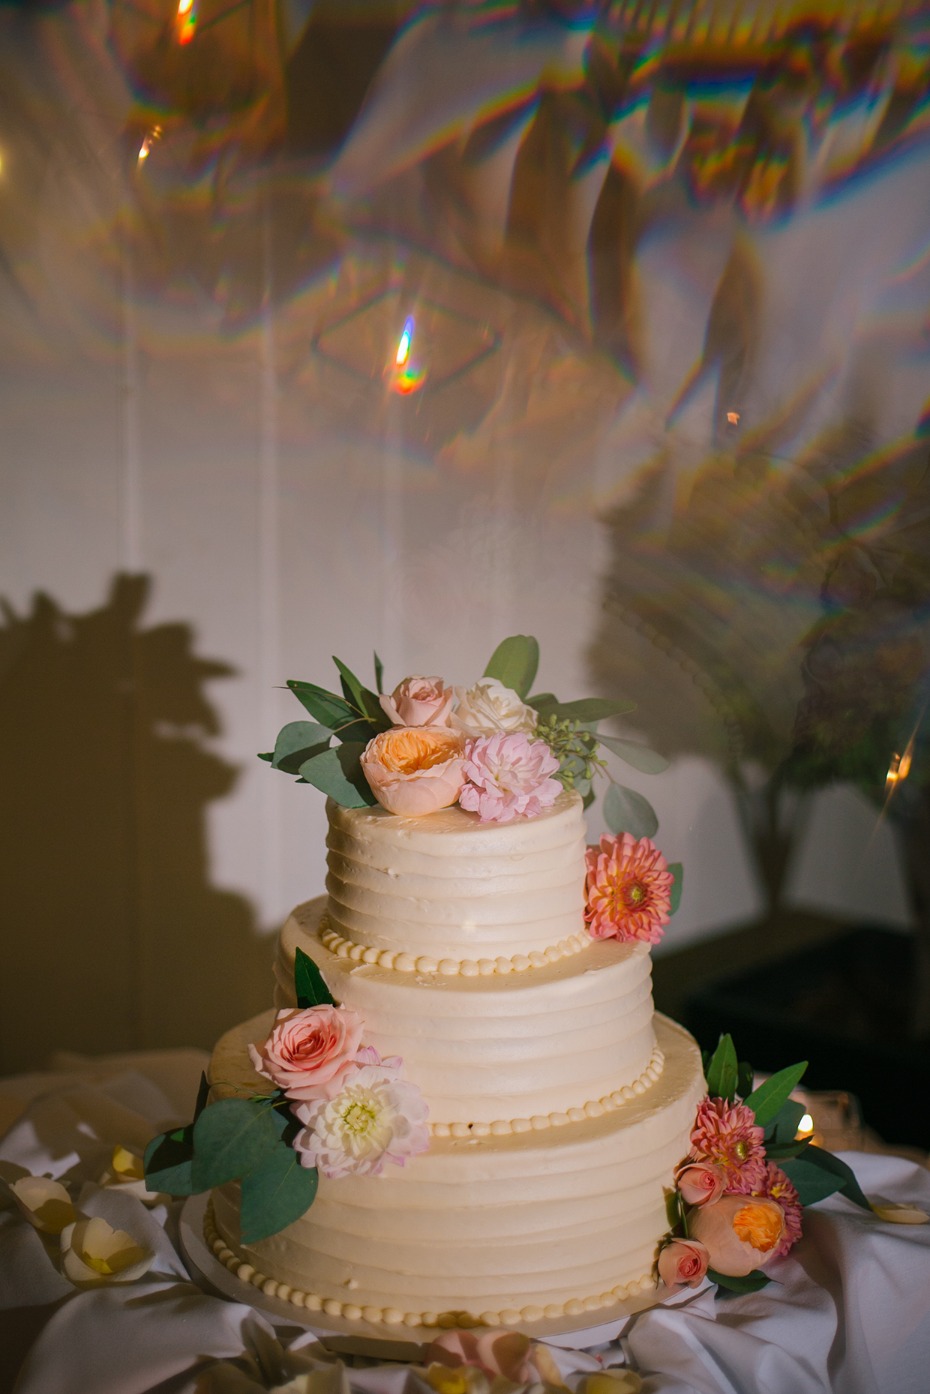 Wedding cake covered in flowers